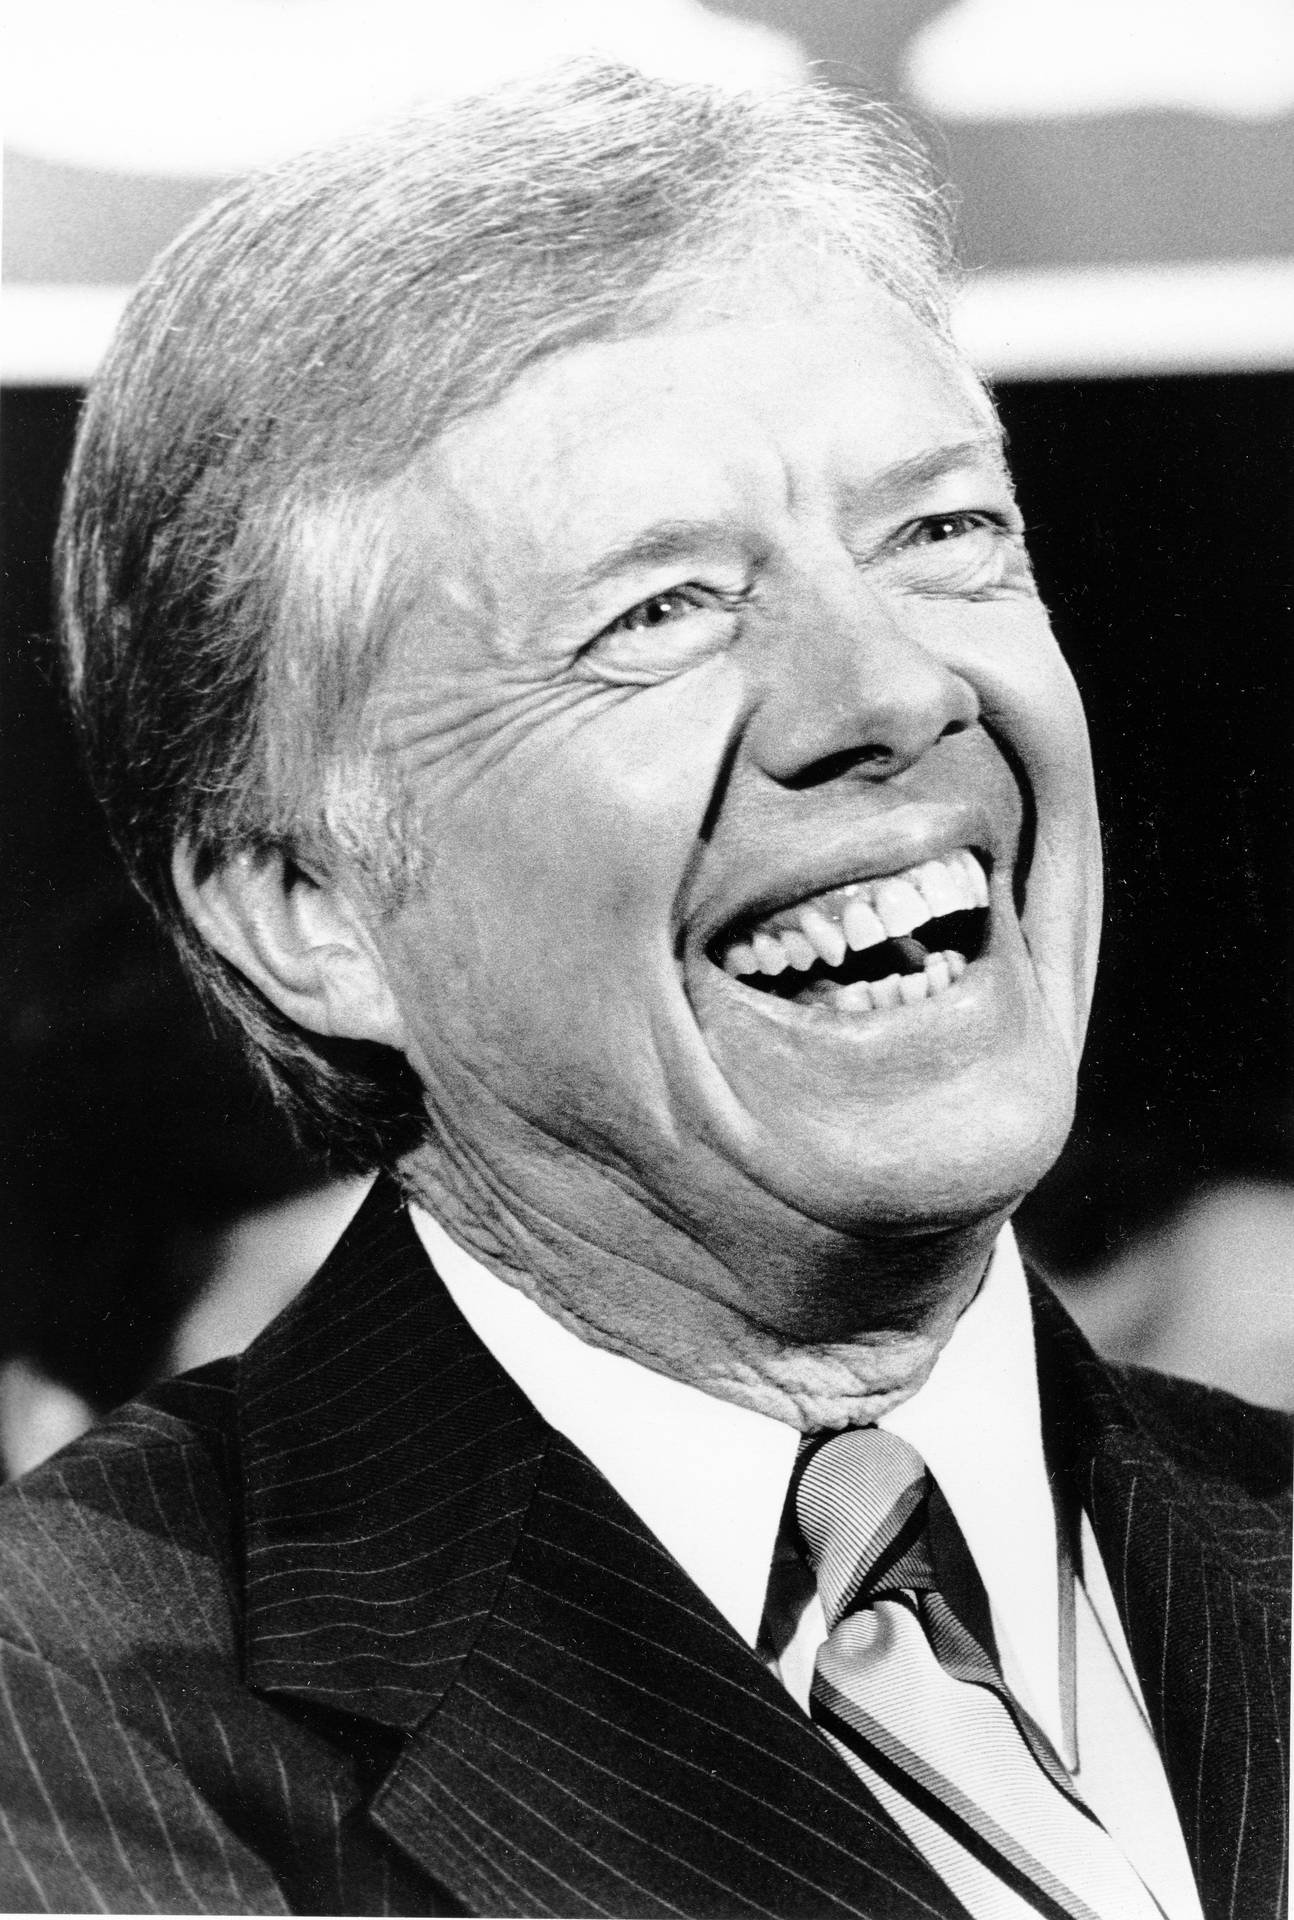 Jimmy Carter With A Big Smile Wallpaper